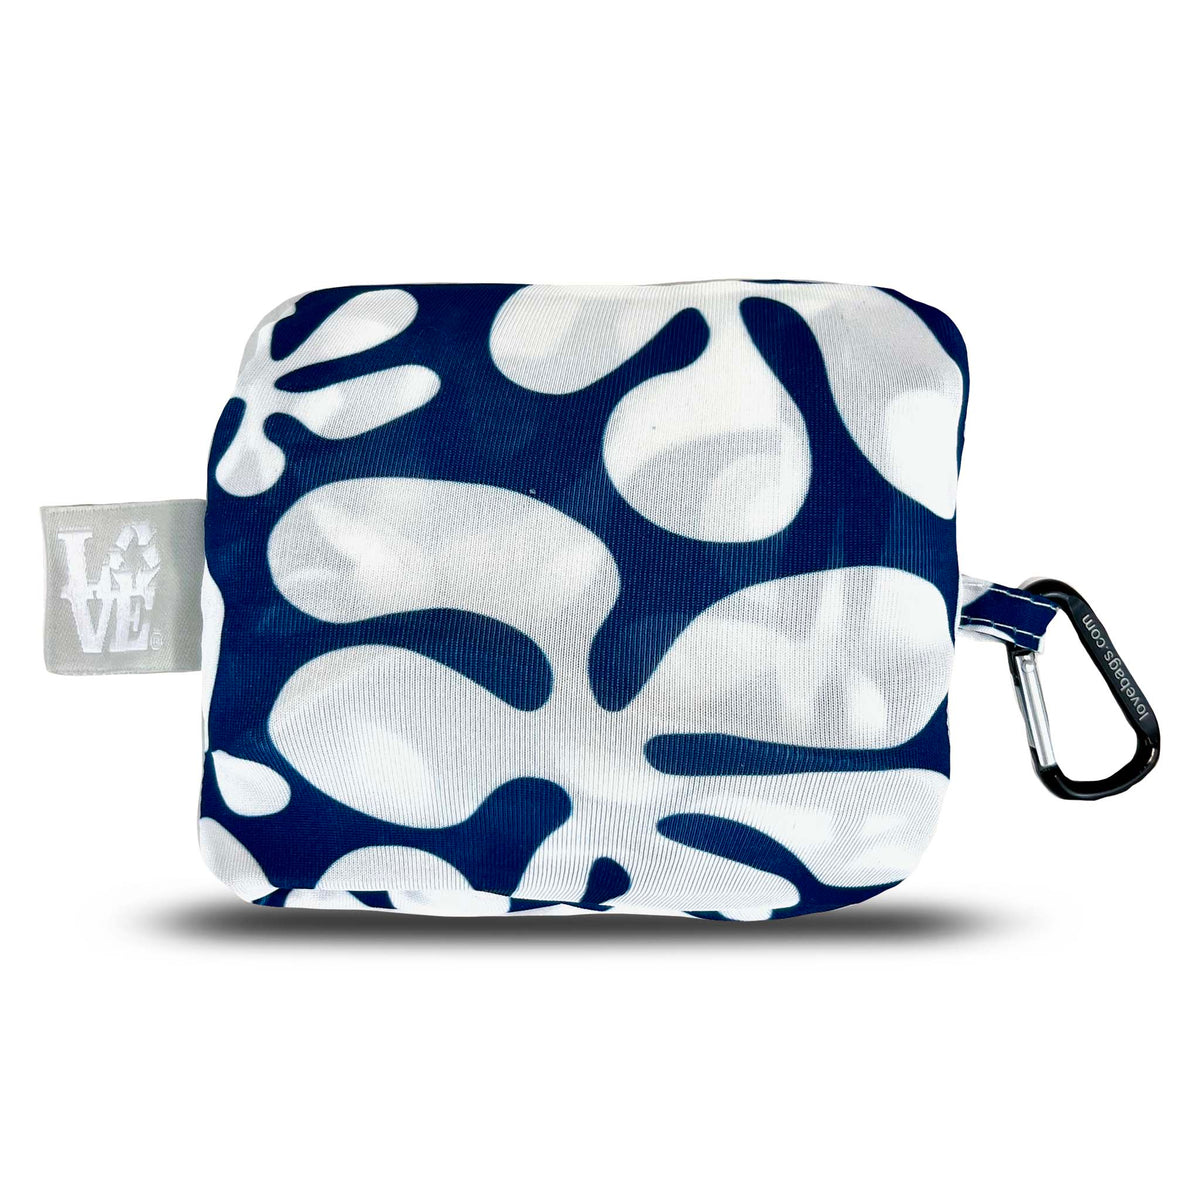 Crossbody Stash It Tote Bag -  Groovy LOVE Navy (with extra long strap)